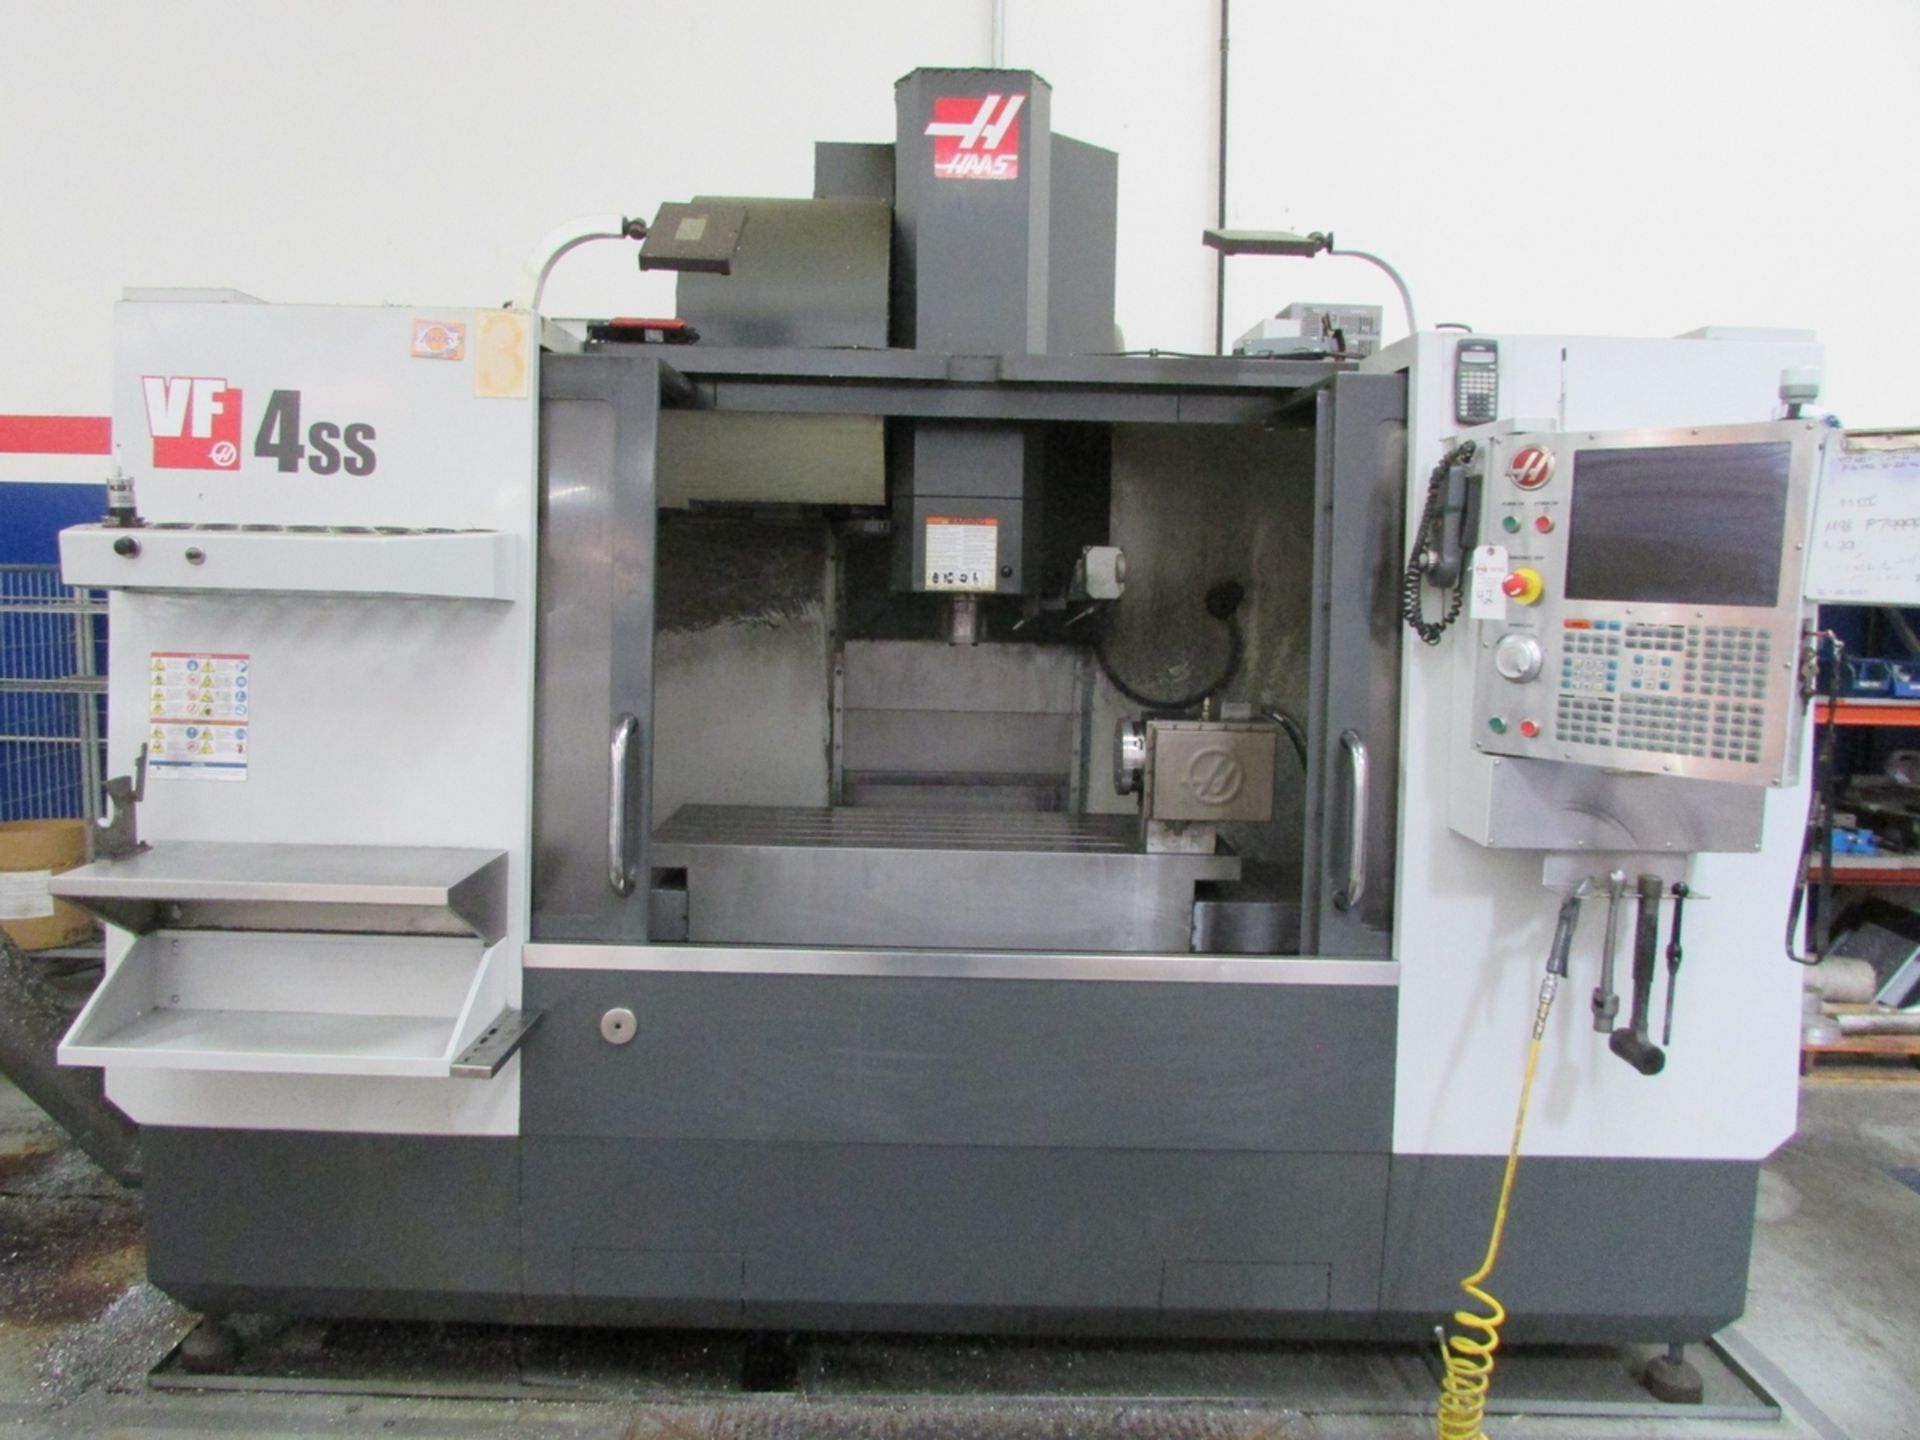 Haas VF4SS Vertical CNC Machining Center (2012) - Image 6 of 51